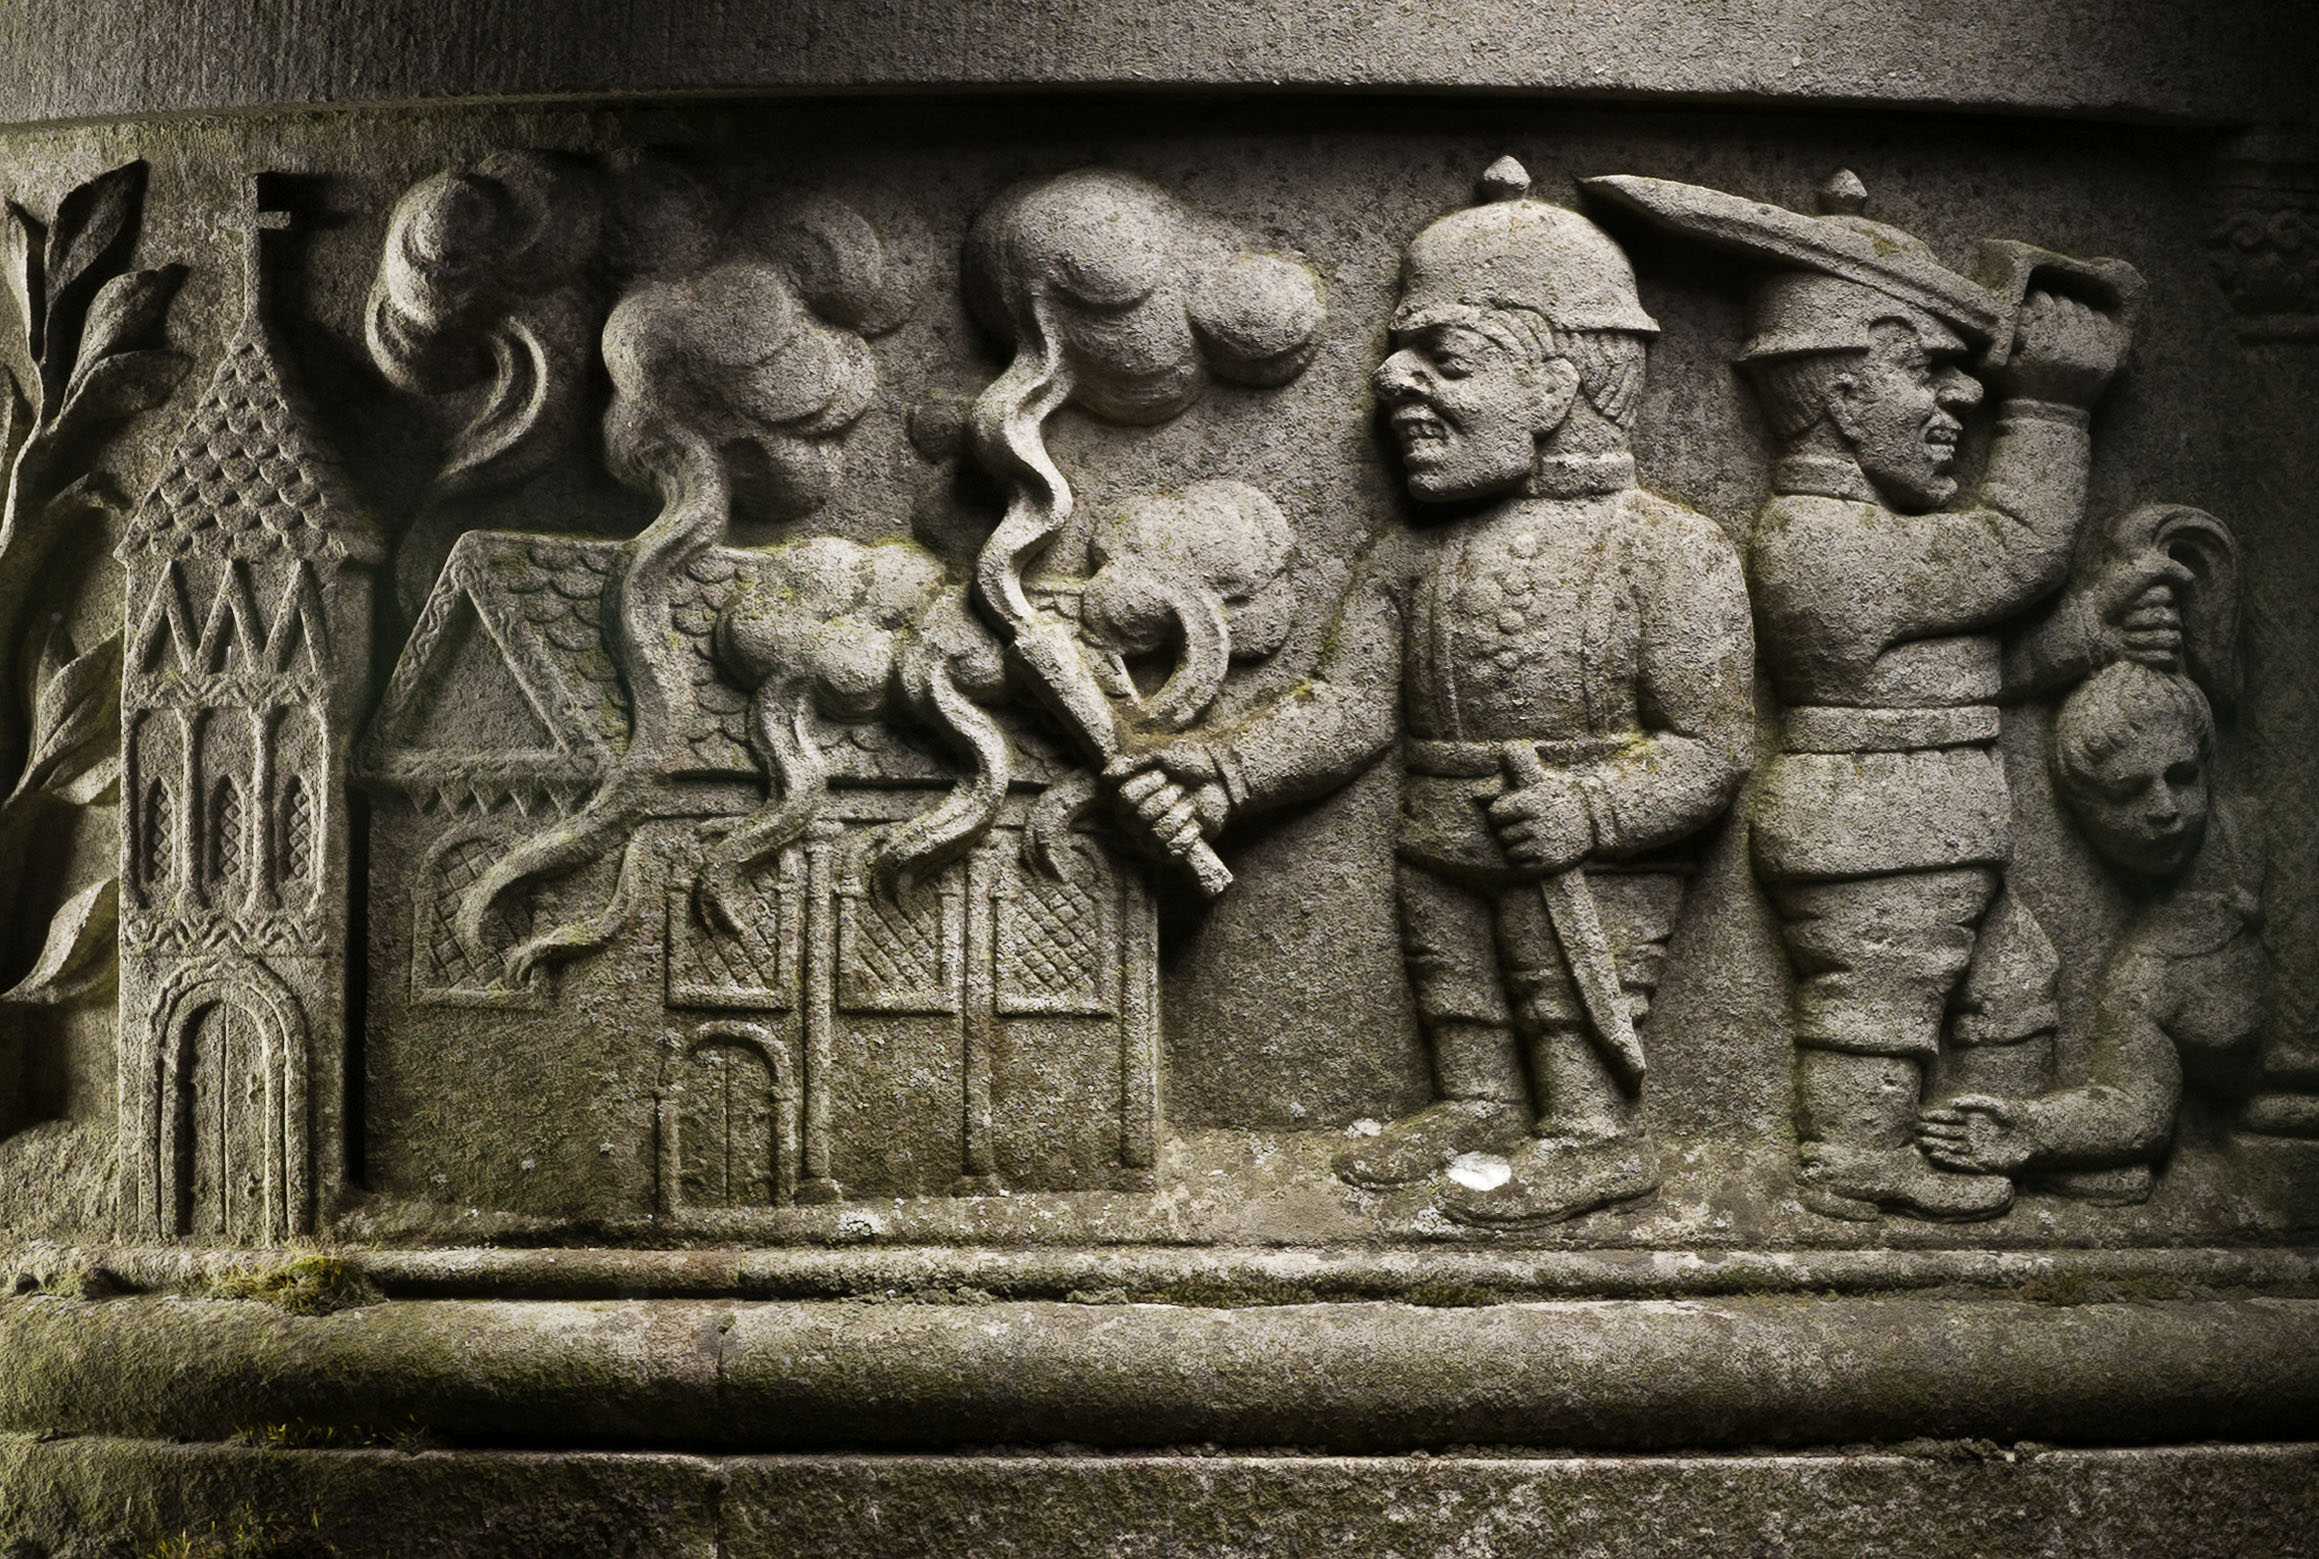 Detail of the carvings on the Wagoners' War Memorial in Sledmere, Yorkshire, now upgraded to Grade I. The carvings describe the role of the Wgoners and depict some atrocities, supposedly committed by German soldiers.